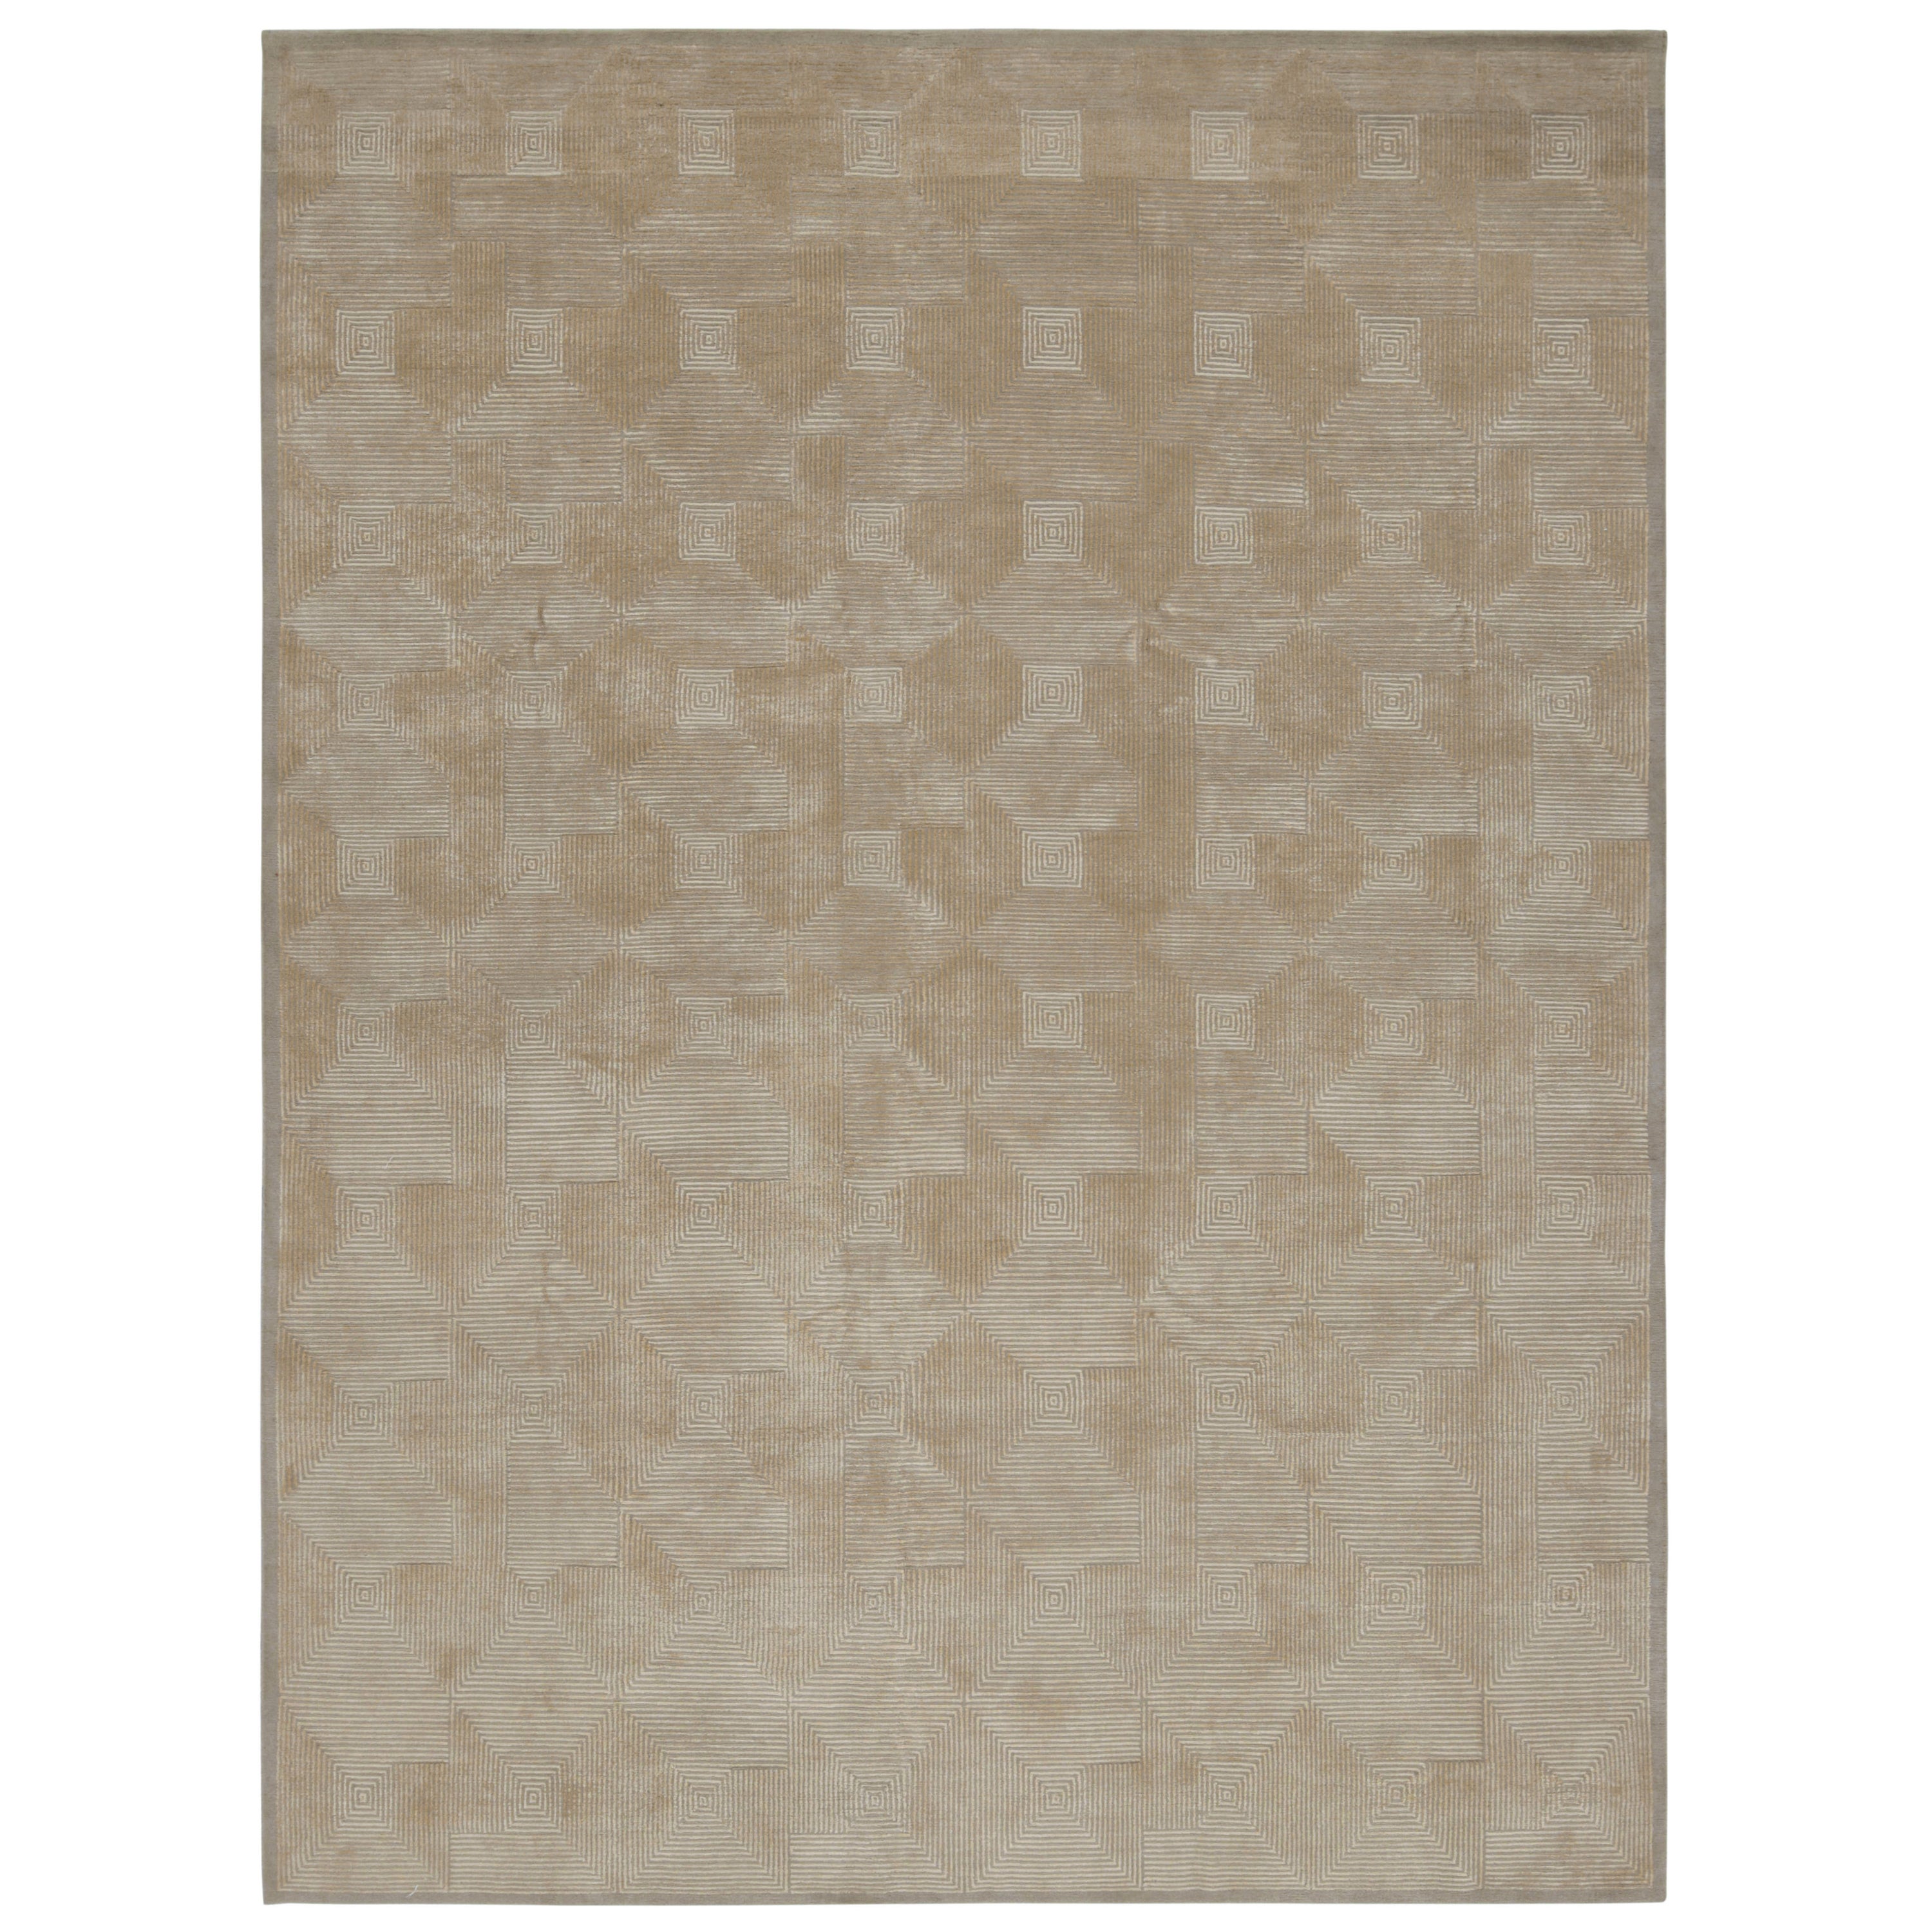 Rug & Kilim’s Cubist Art Deco Style Rug in Beige-Brown Geometric Patterns For Sale